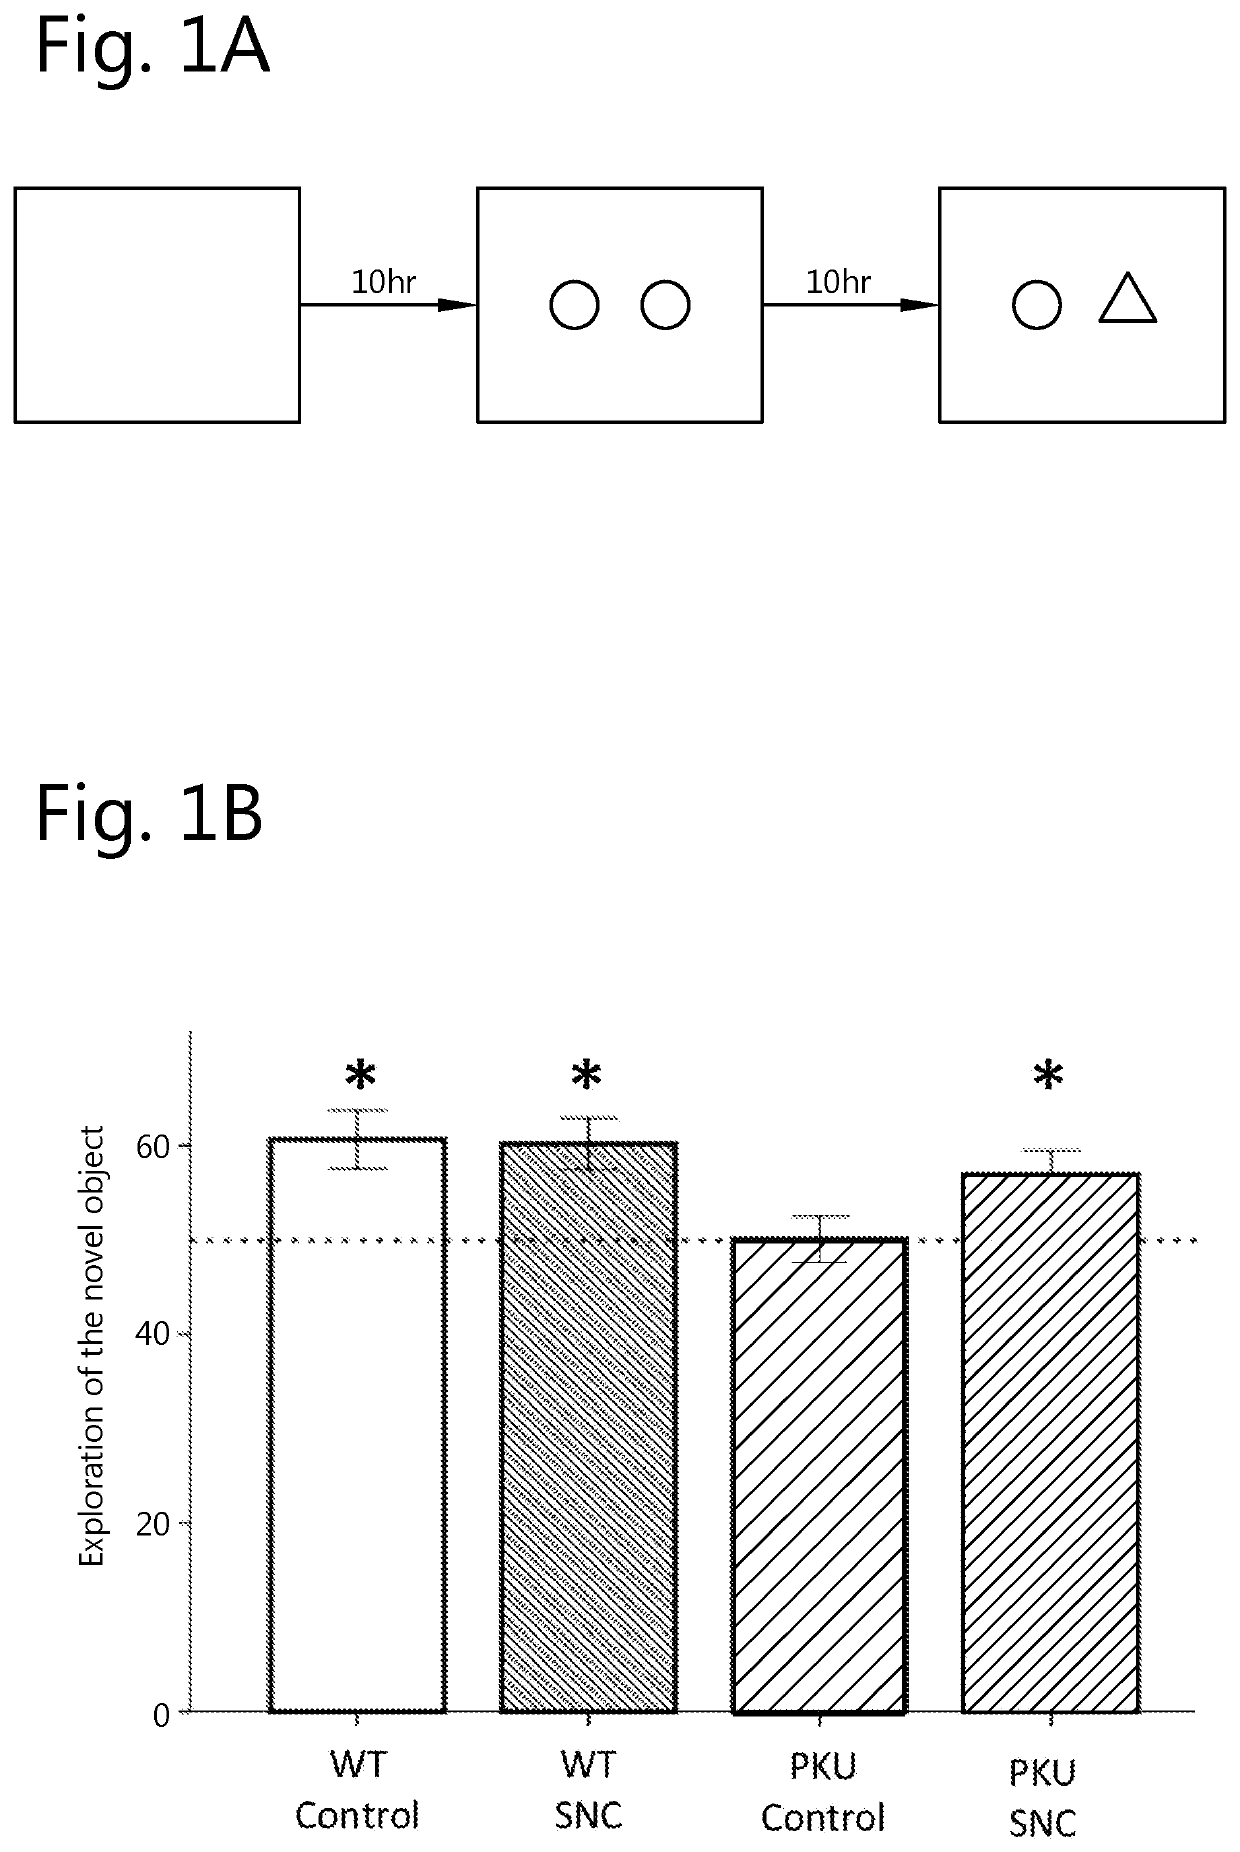 Method for improving recognition and/or working memory in hyperphenylalanimenia and phenylketonuria patients